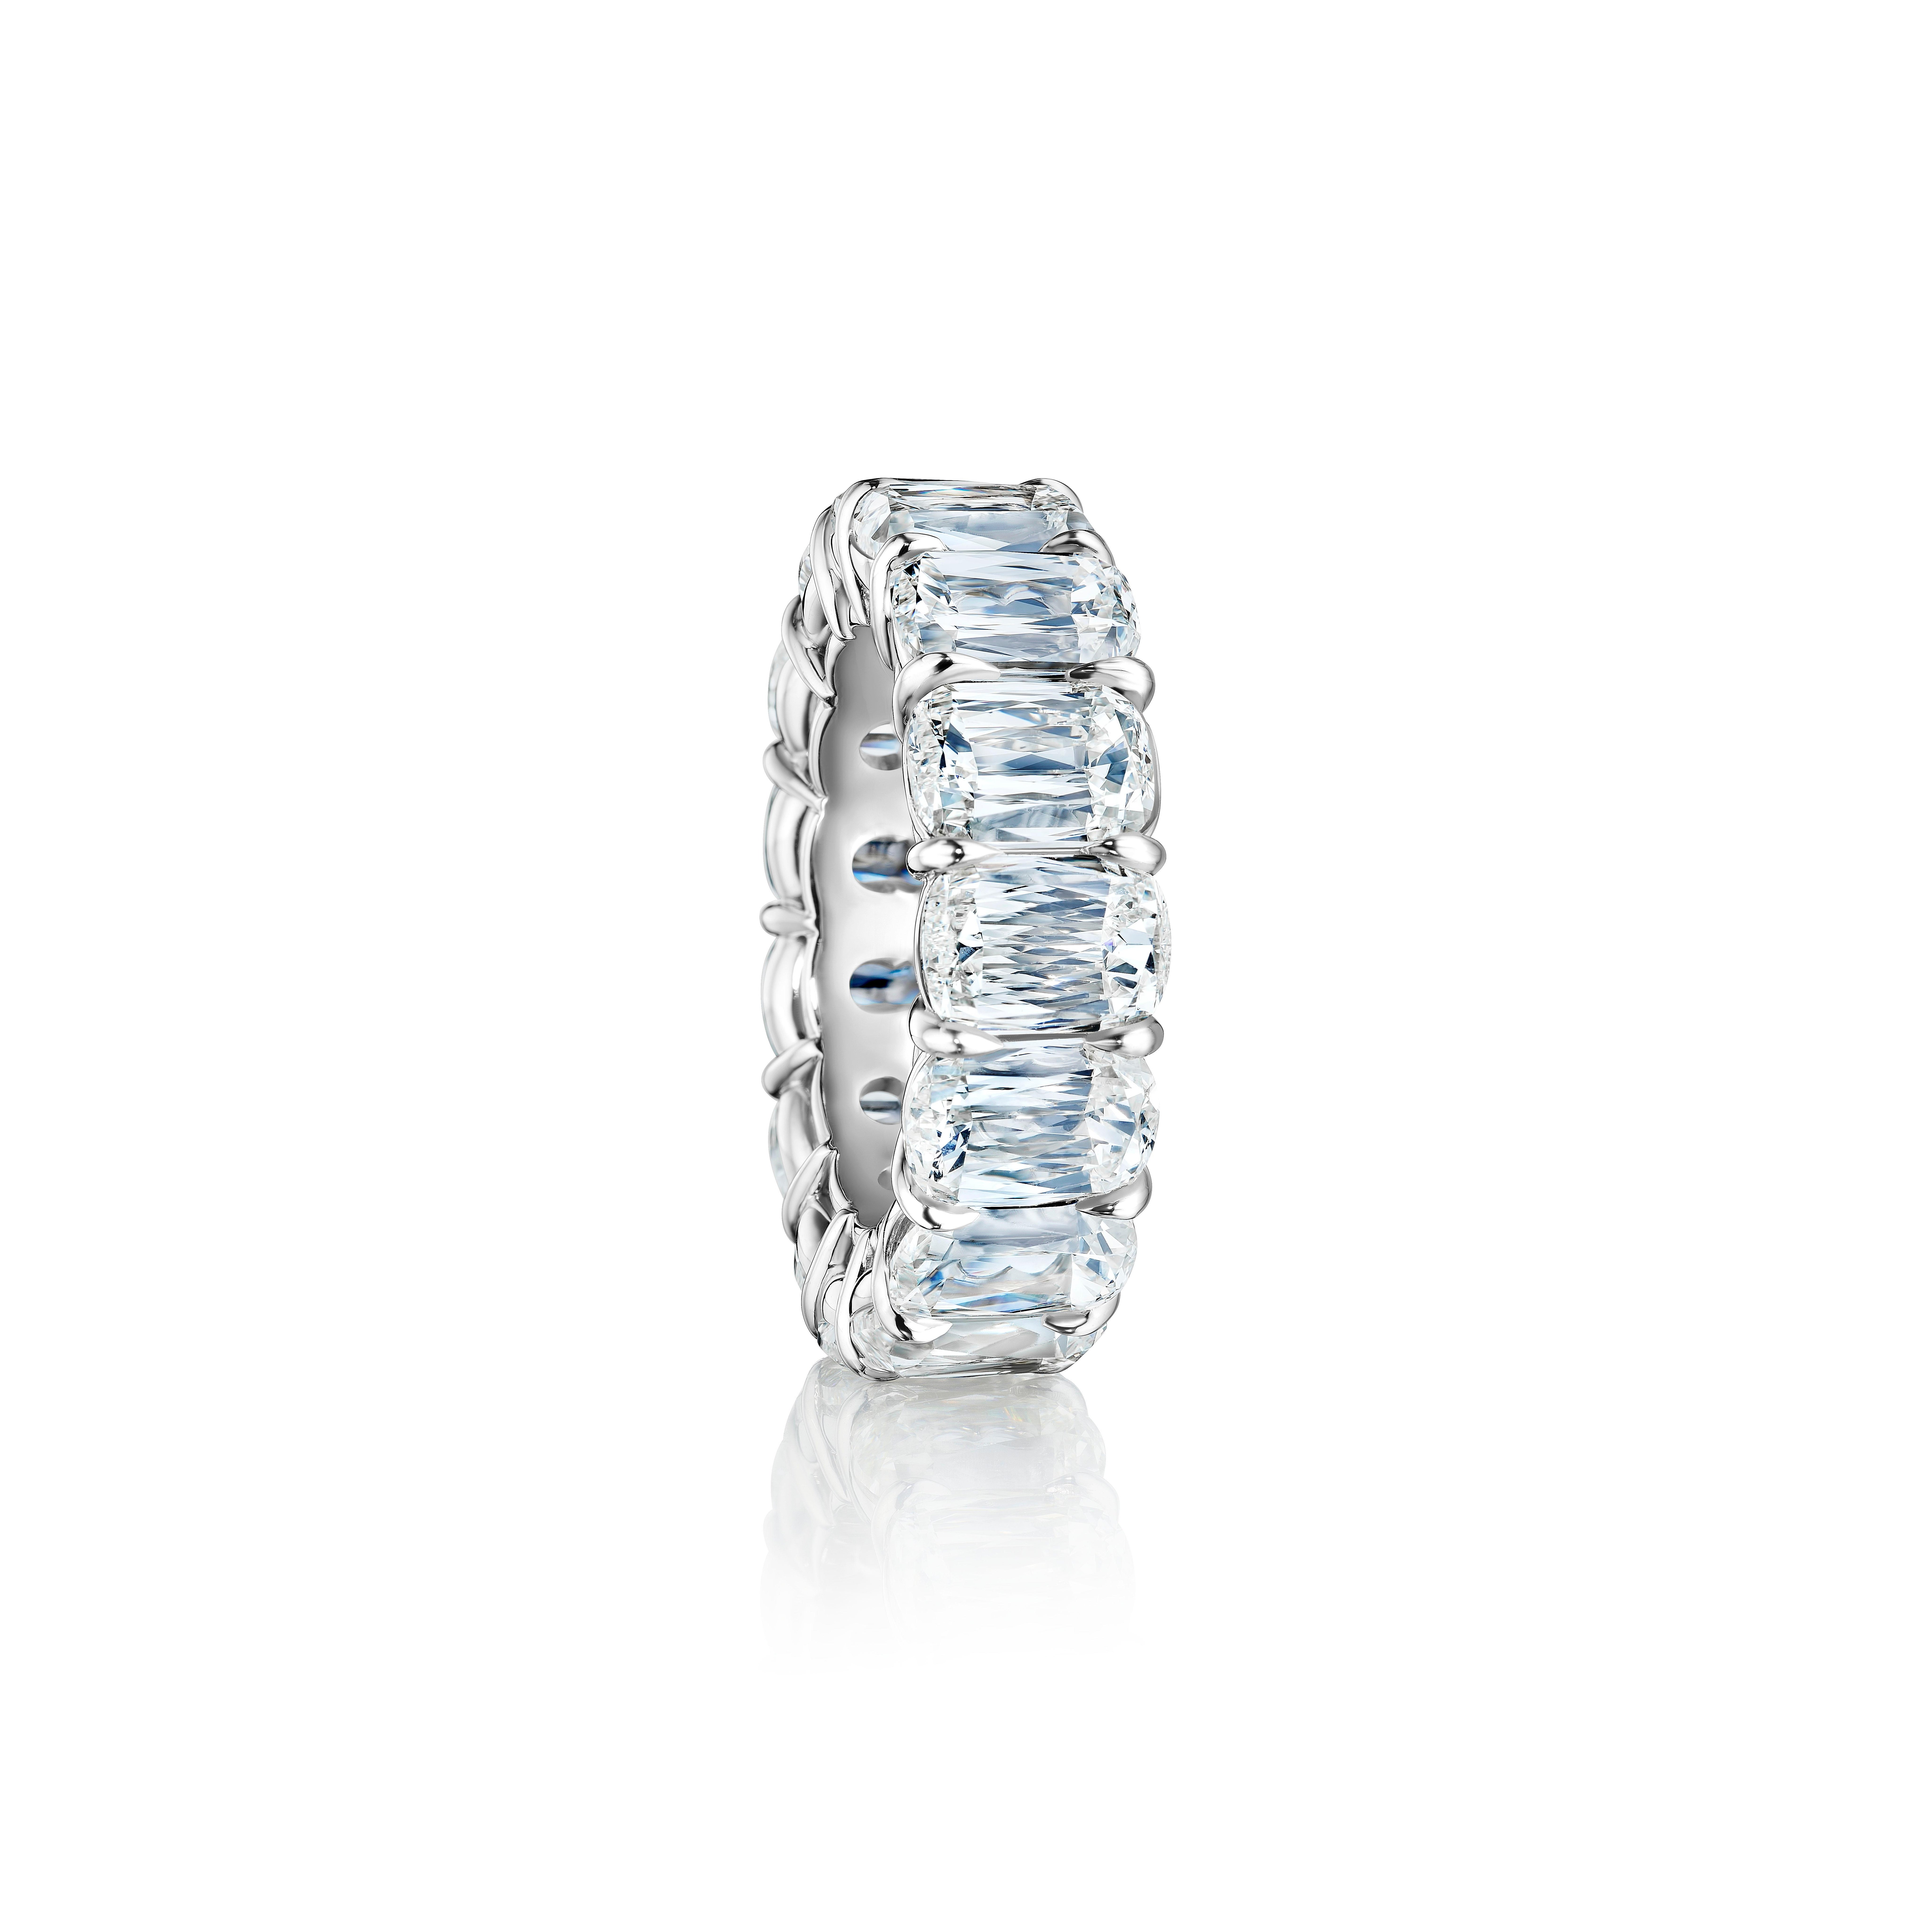 A magnificent ring of Ultimate sophistication. 

Cushion Brilliants in a contemporary cutting style to show ultimate sophistication in every one of these facets. 15 stones weighing over 1.0 Carats each for a total of 15.05 Carats. Set in Platinum.